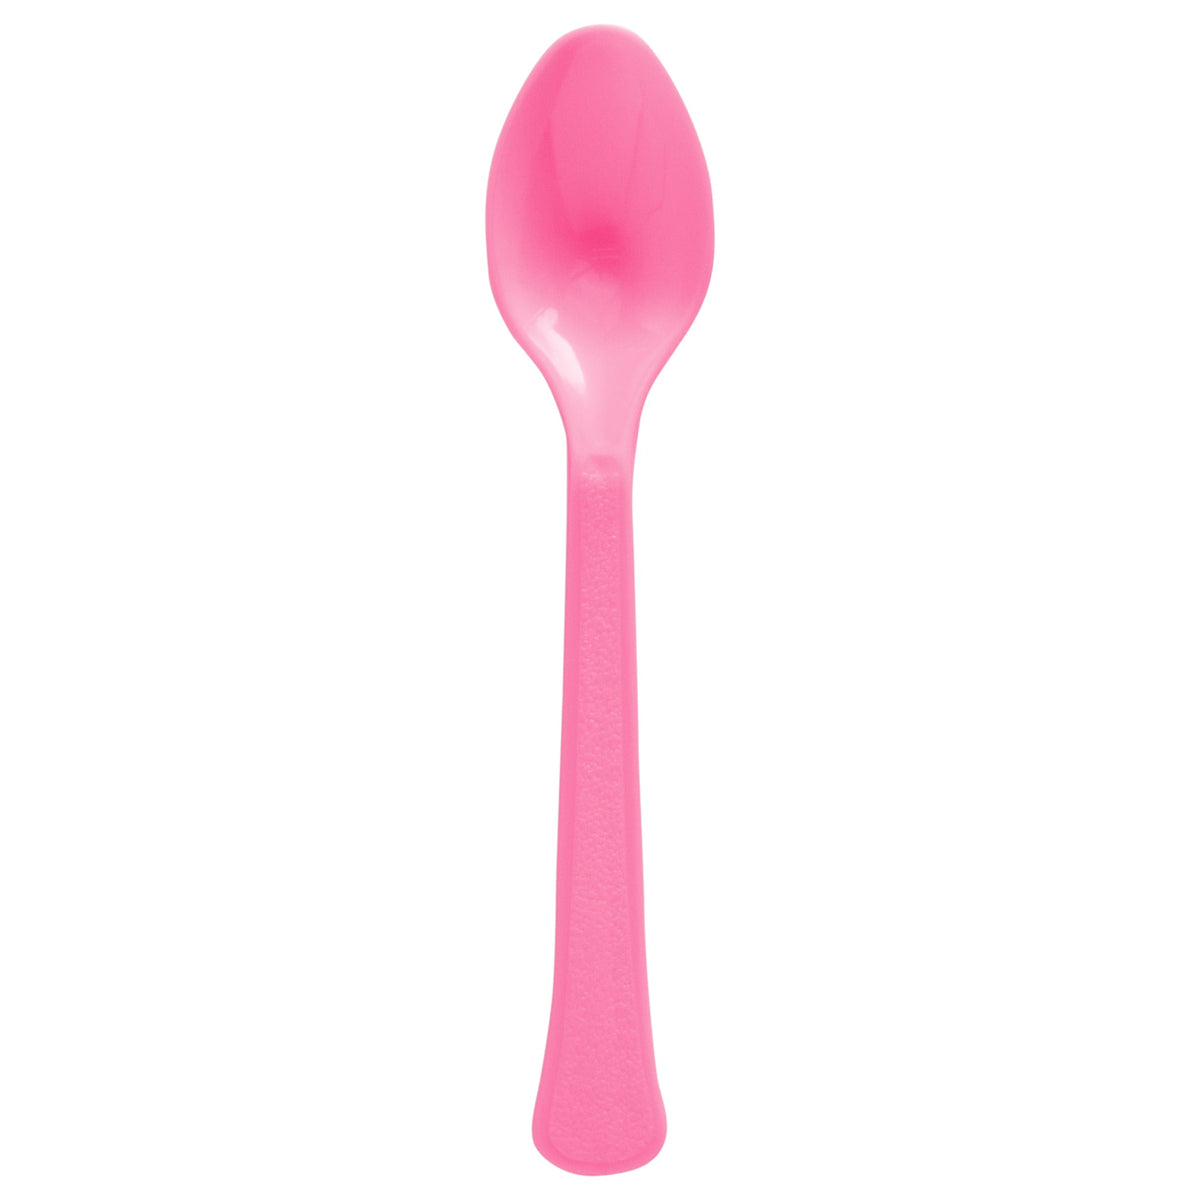 Bright Pink Spoons - 50 Count Heavyweight PP( Polypropylene) Plastic Spoons